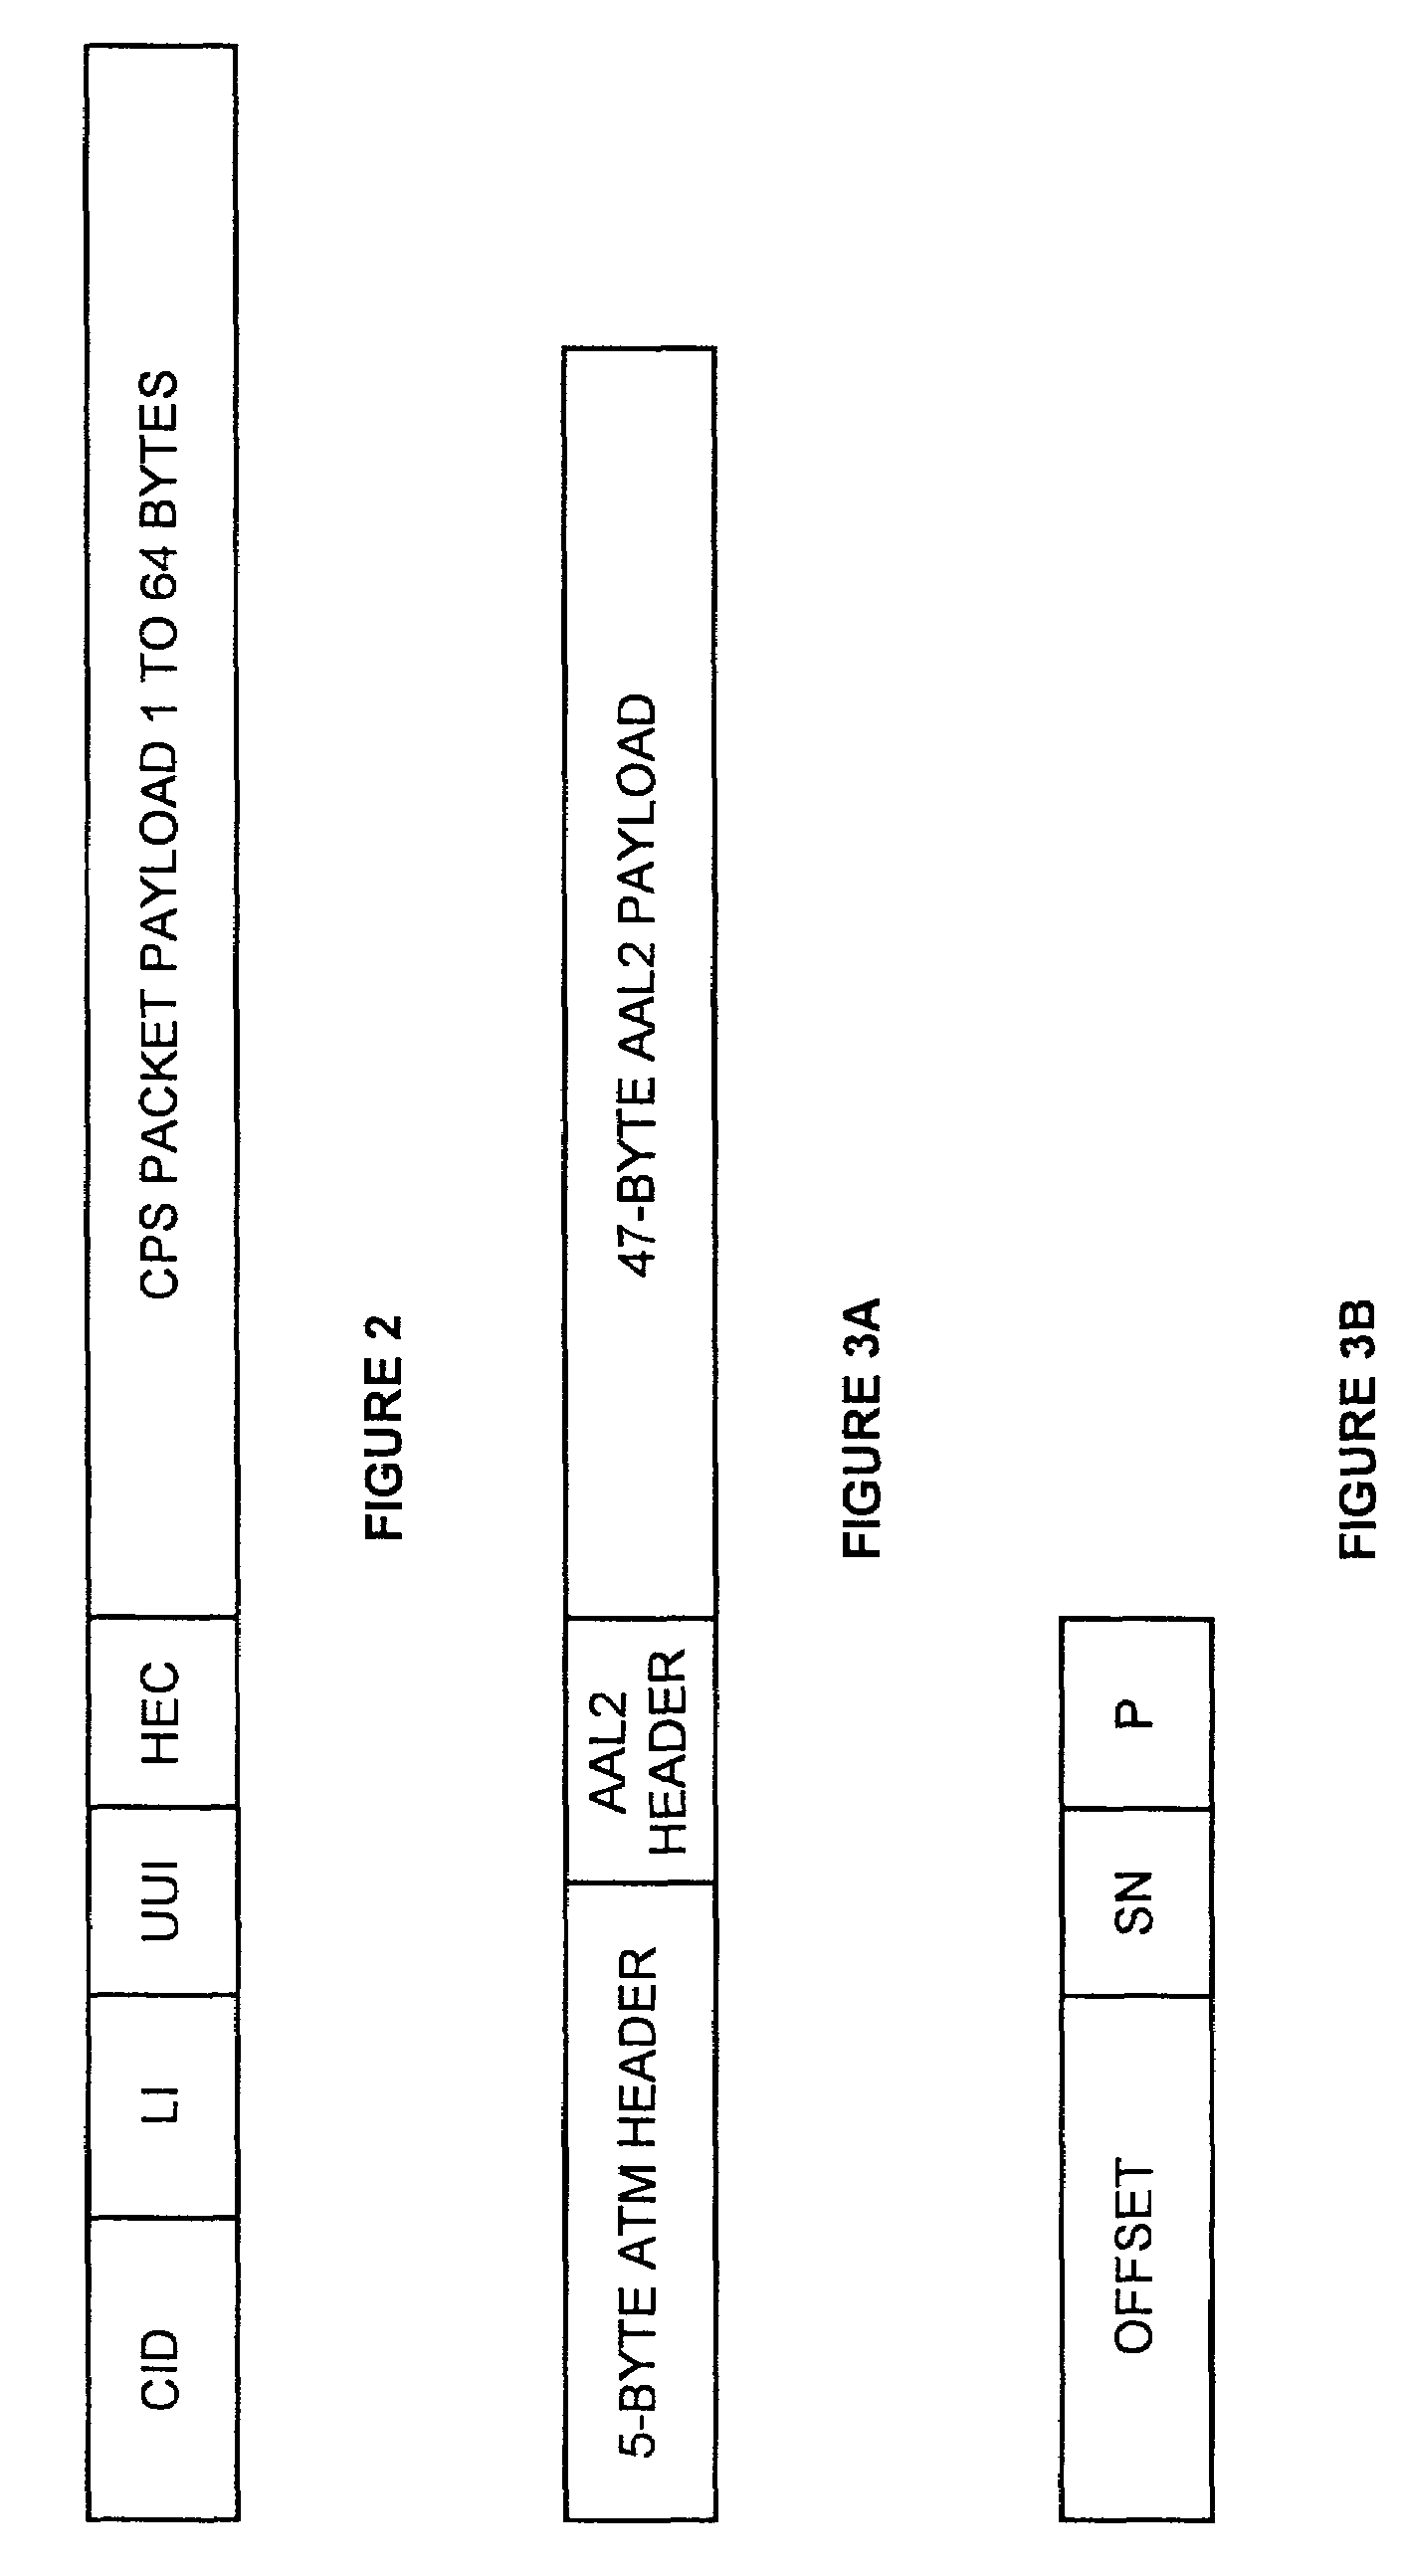 Voice packet processor and method of operation thereof